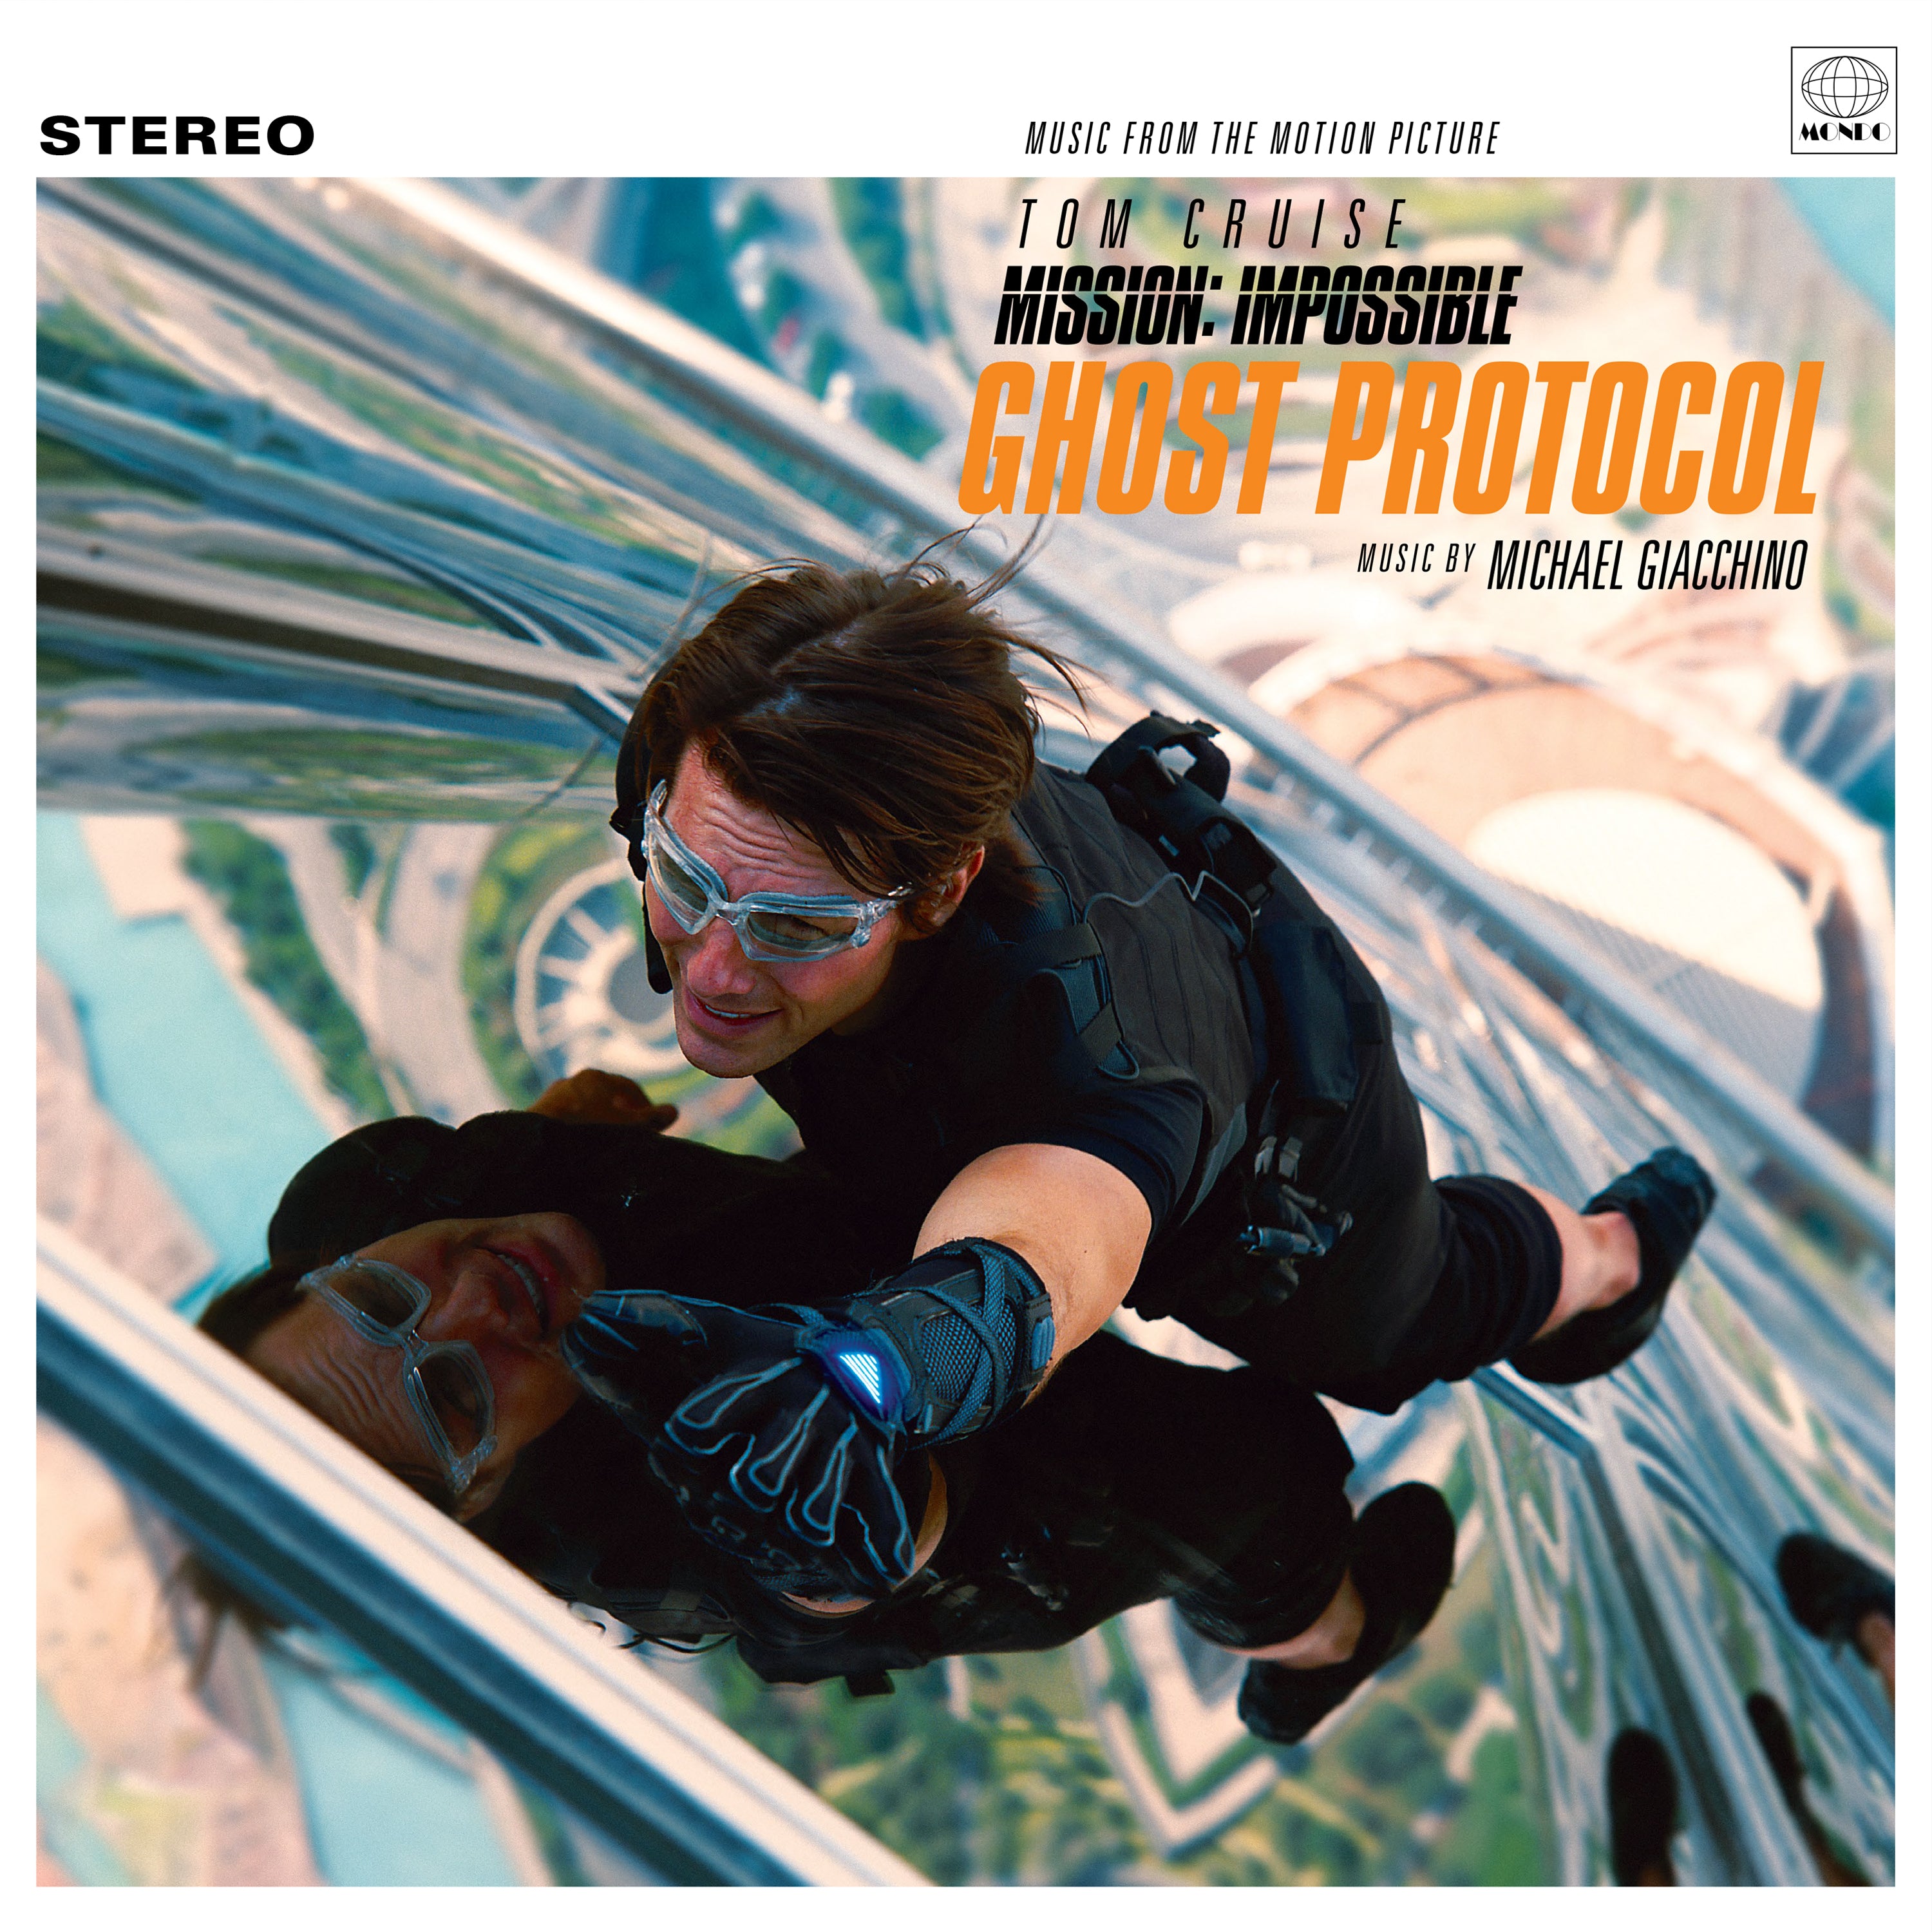 Mission: Impossible – Fallout – Music From The Original Motion